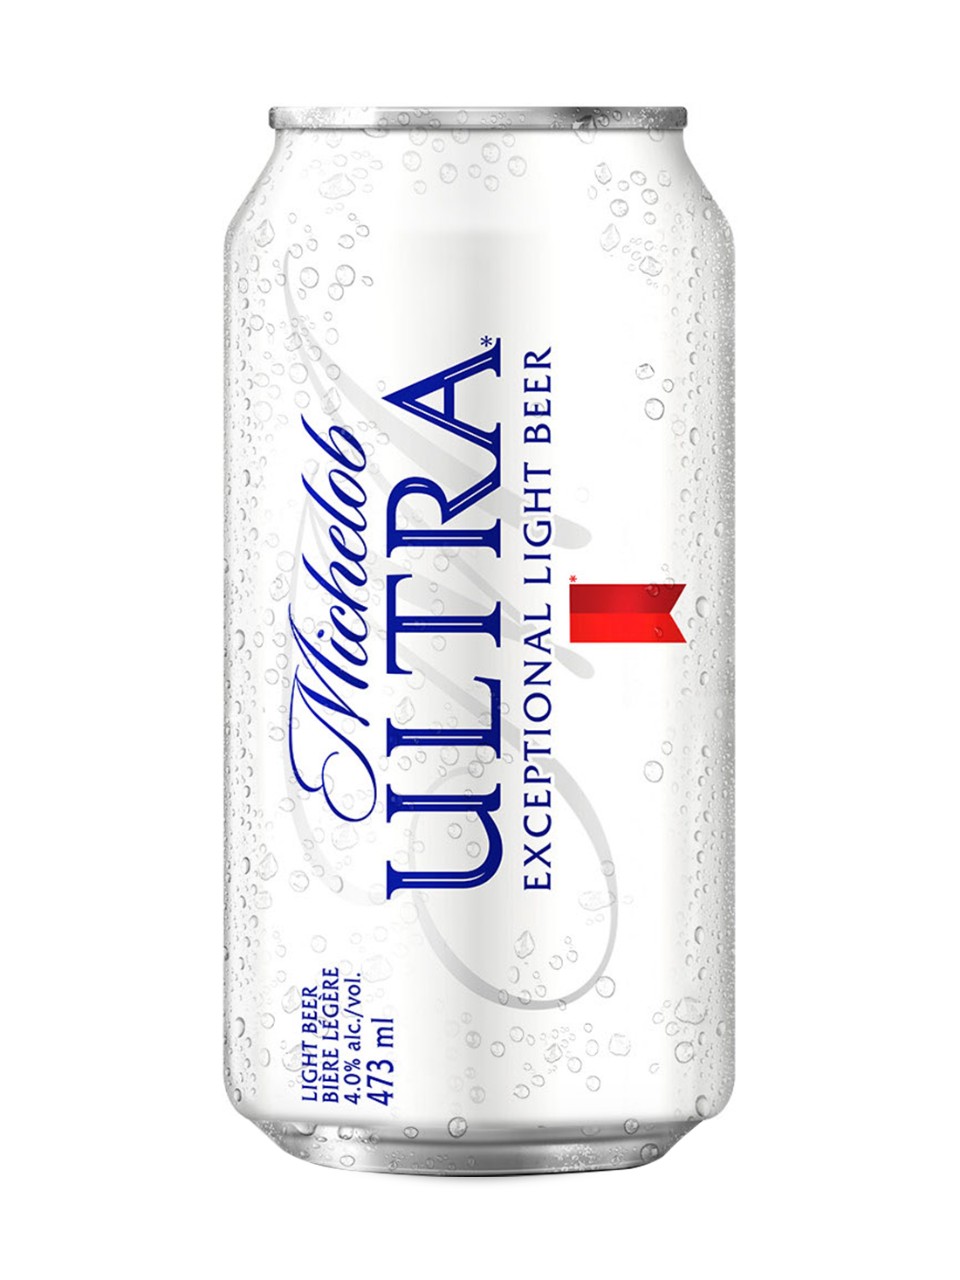 michelob-ultra-showcases-new-bottle-format-betterretailing-rebate2022